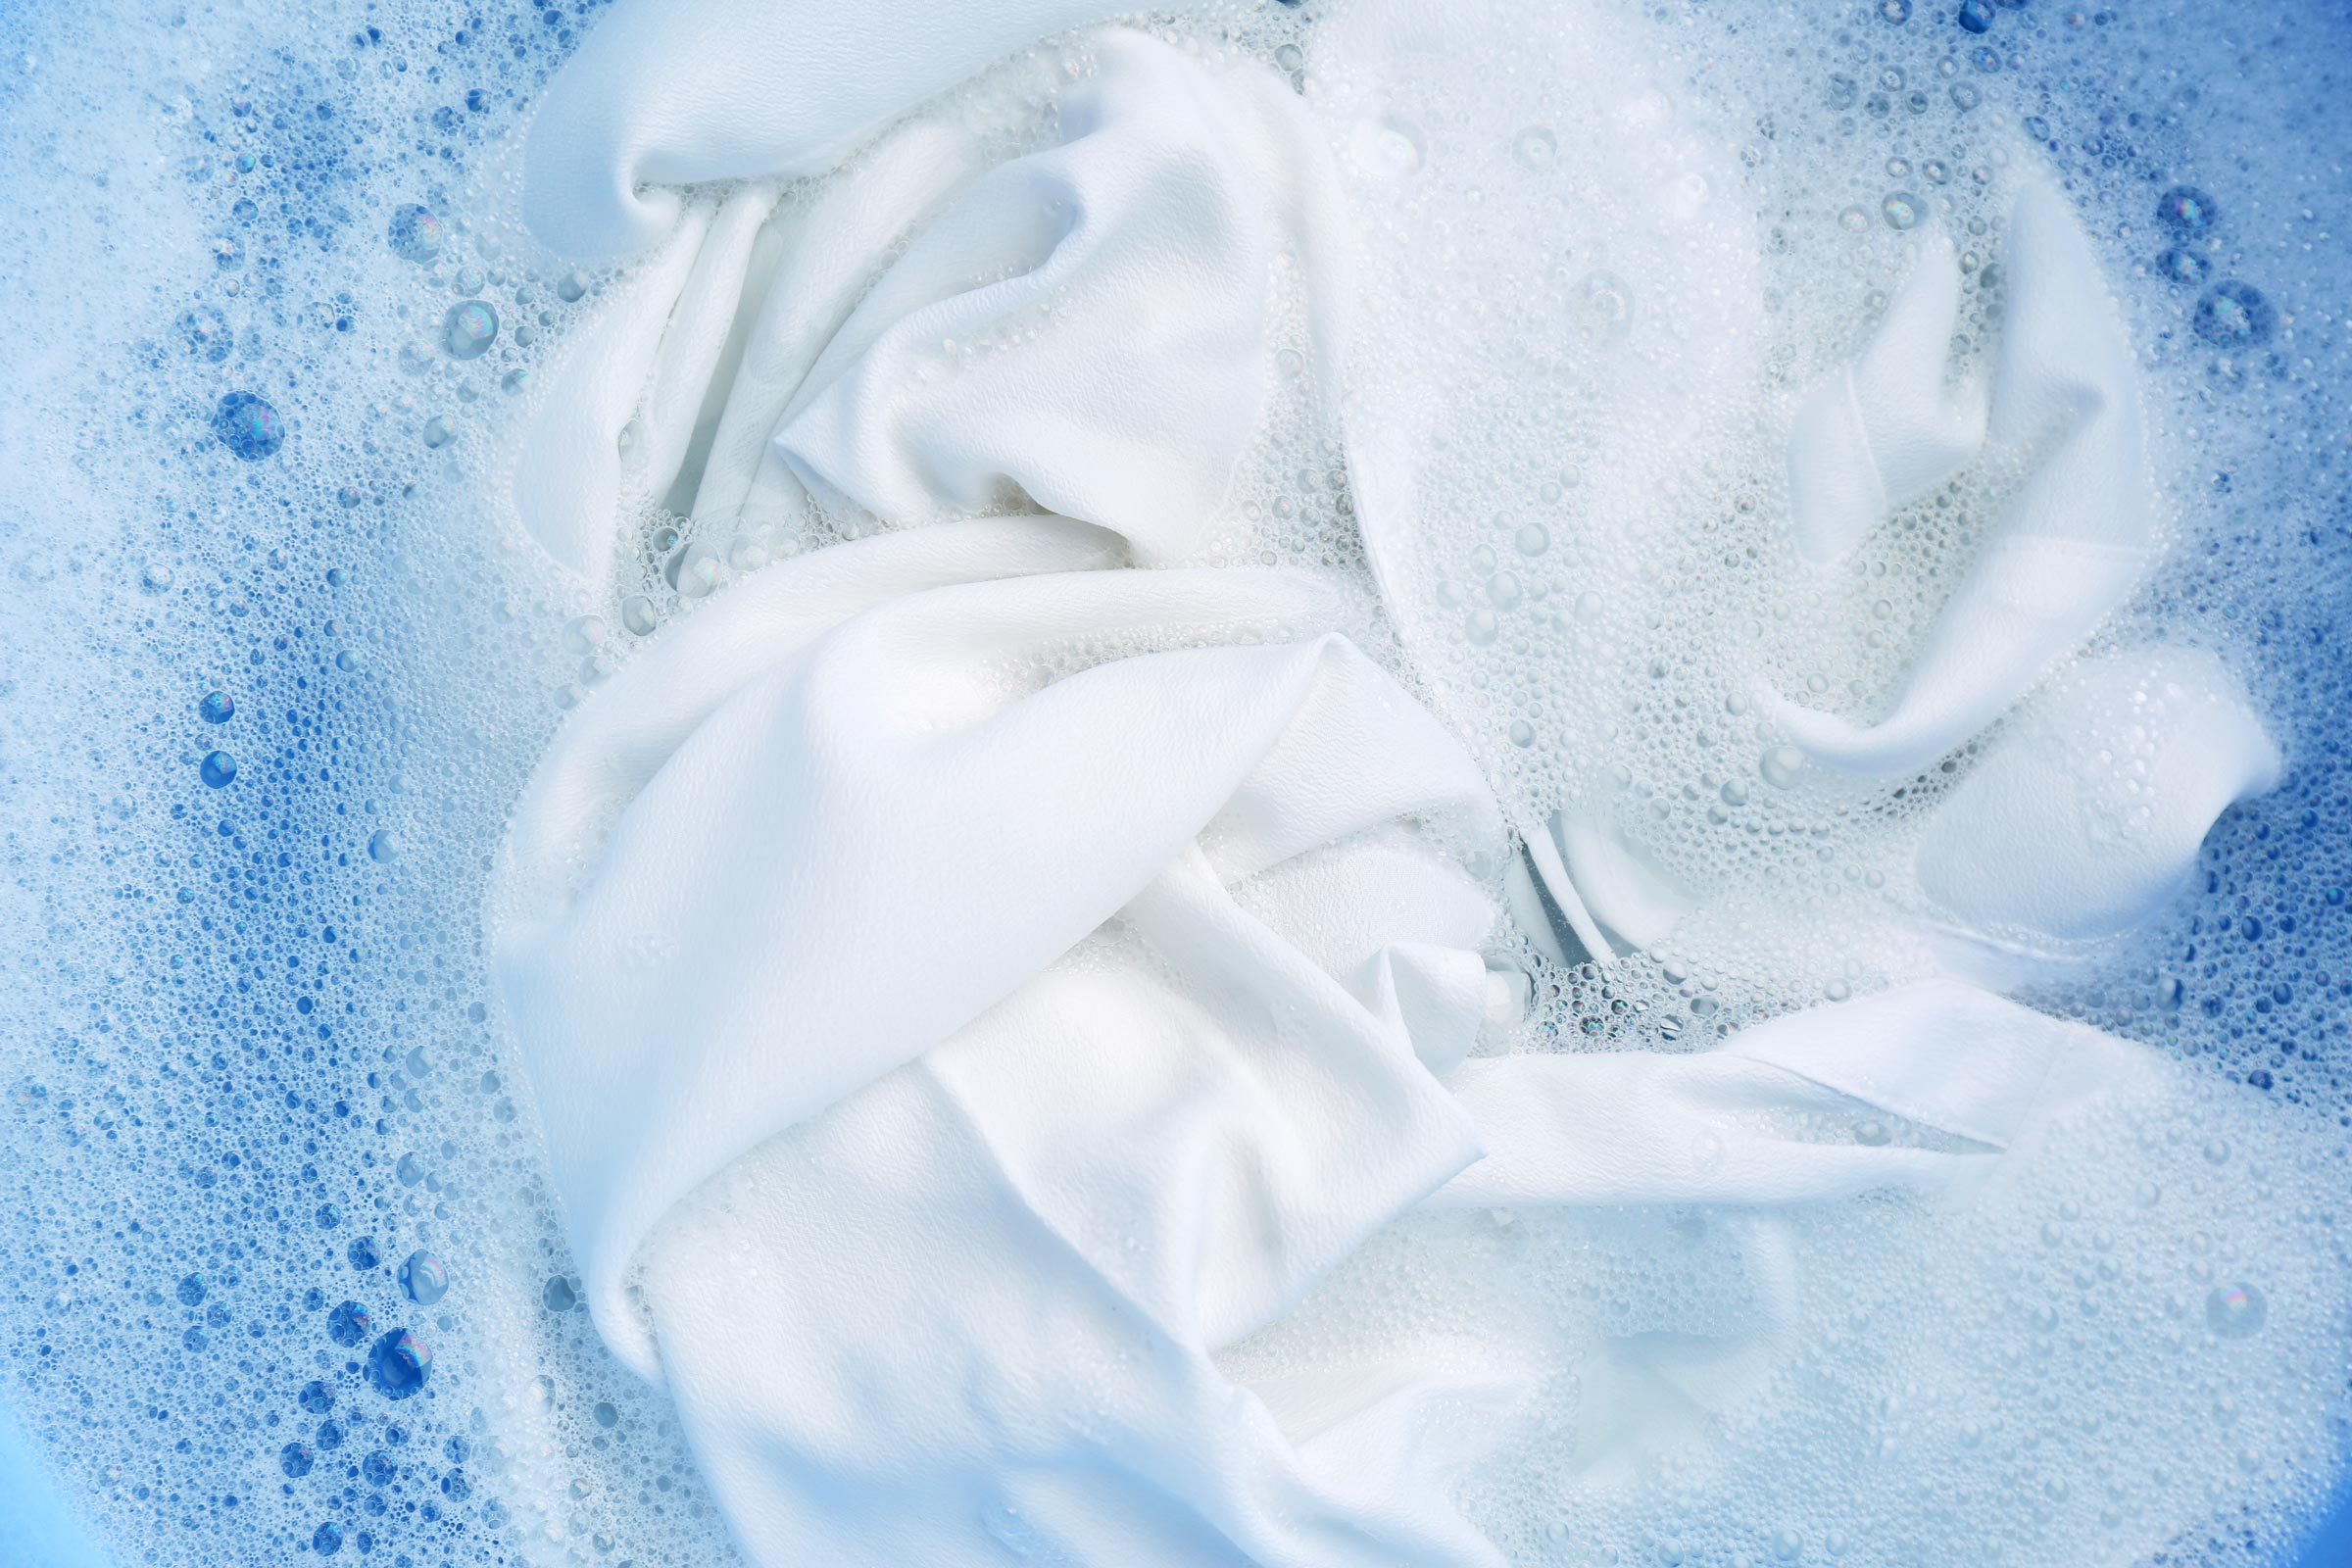 How to Hand-Wash Clothes: 7 Easy Steps for All Types of Clothing